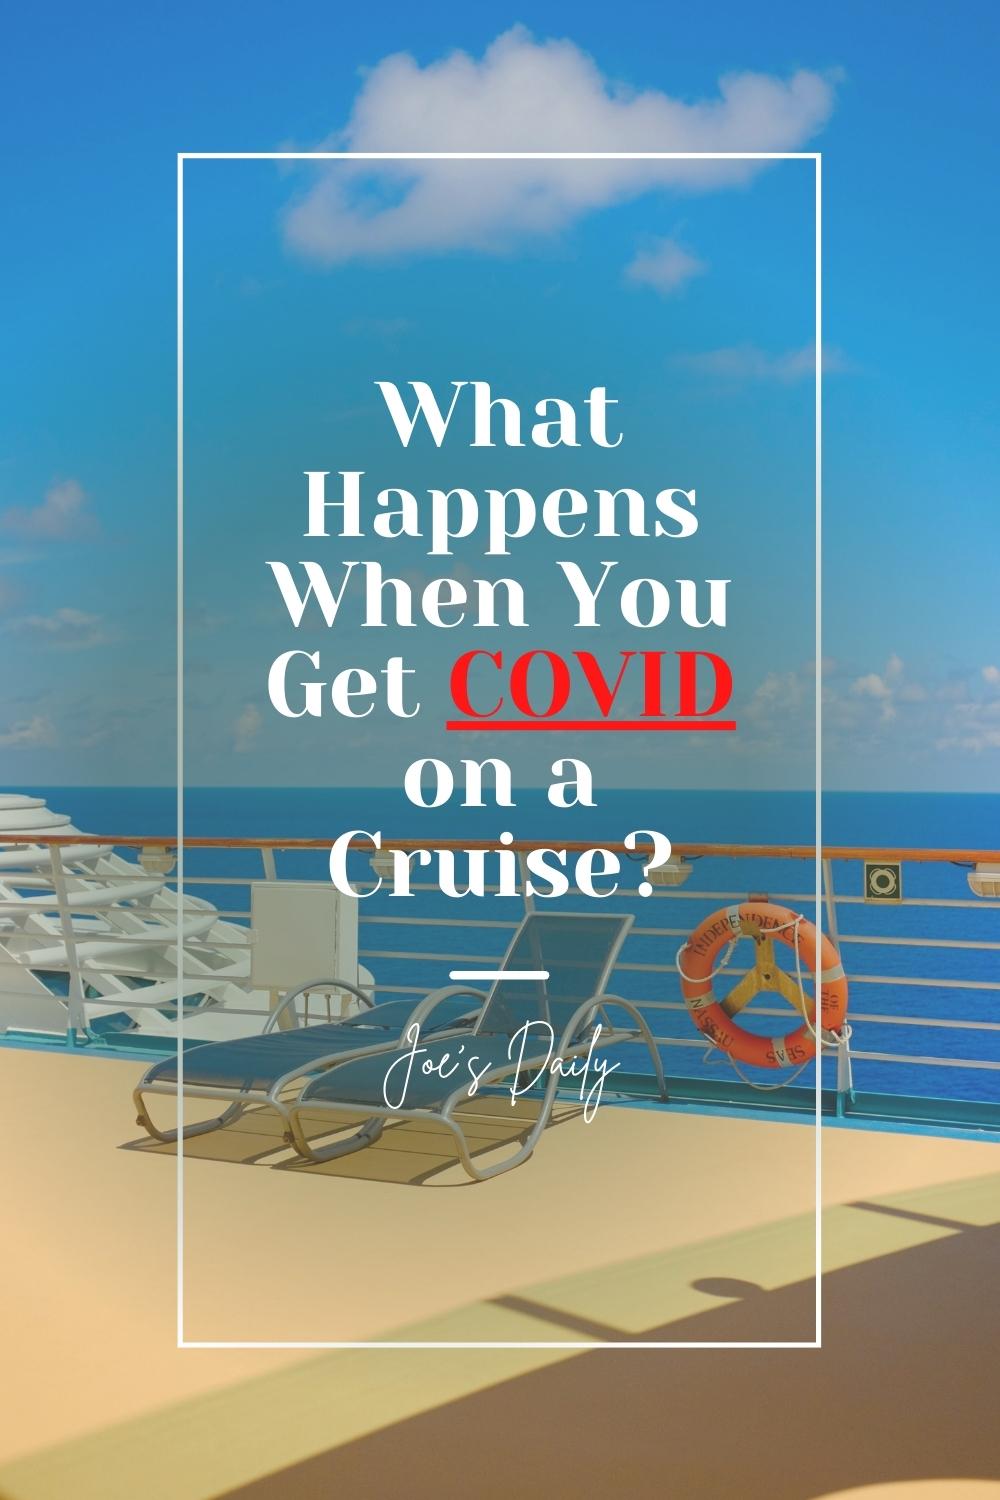 Here's what happens when you get COVID on a cruise